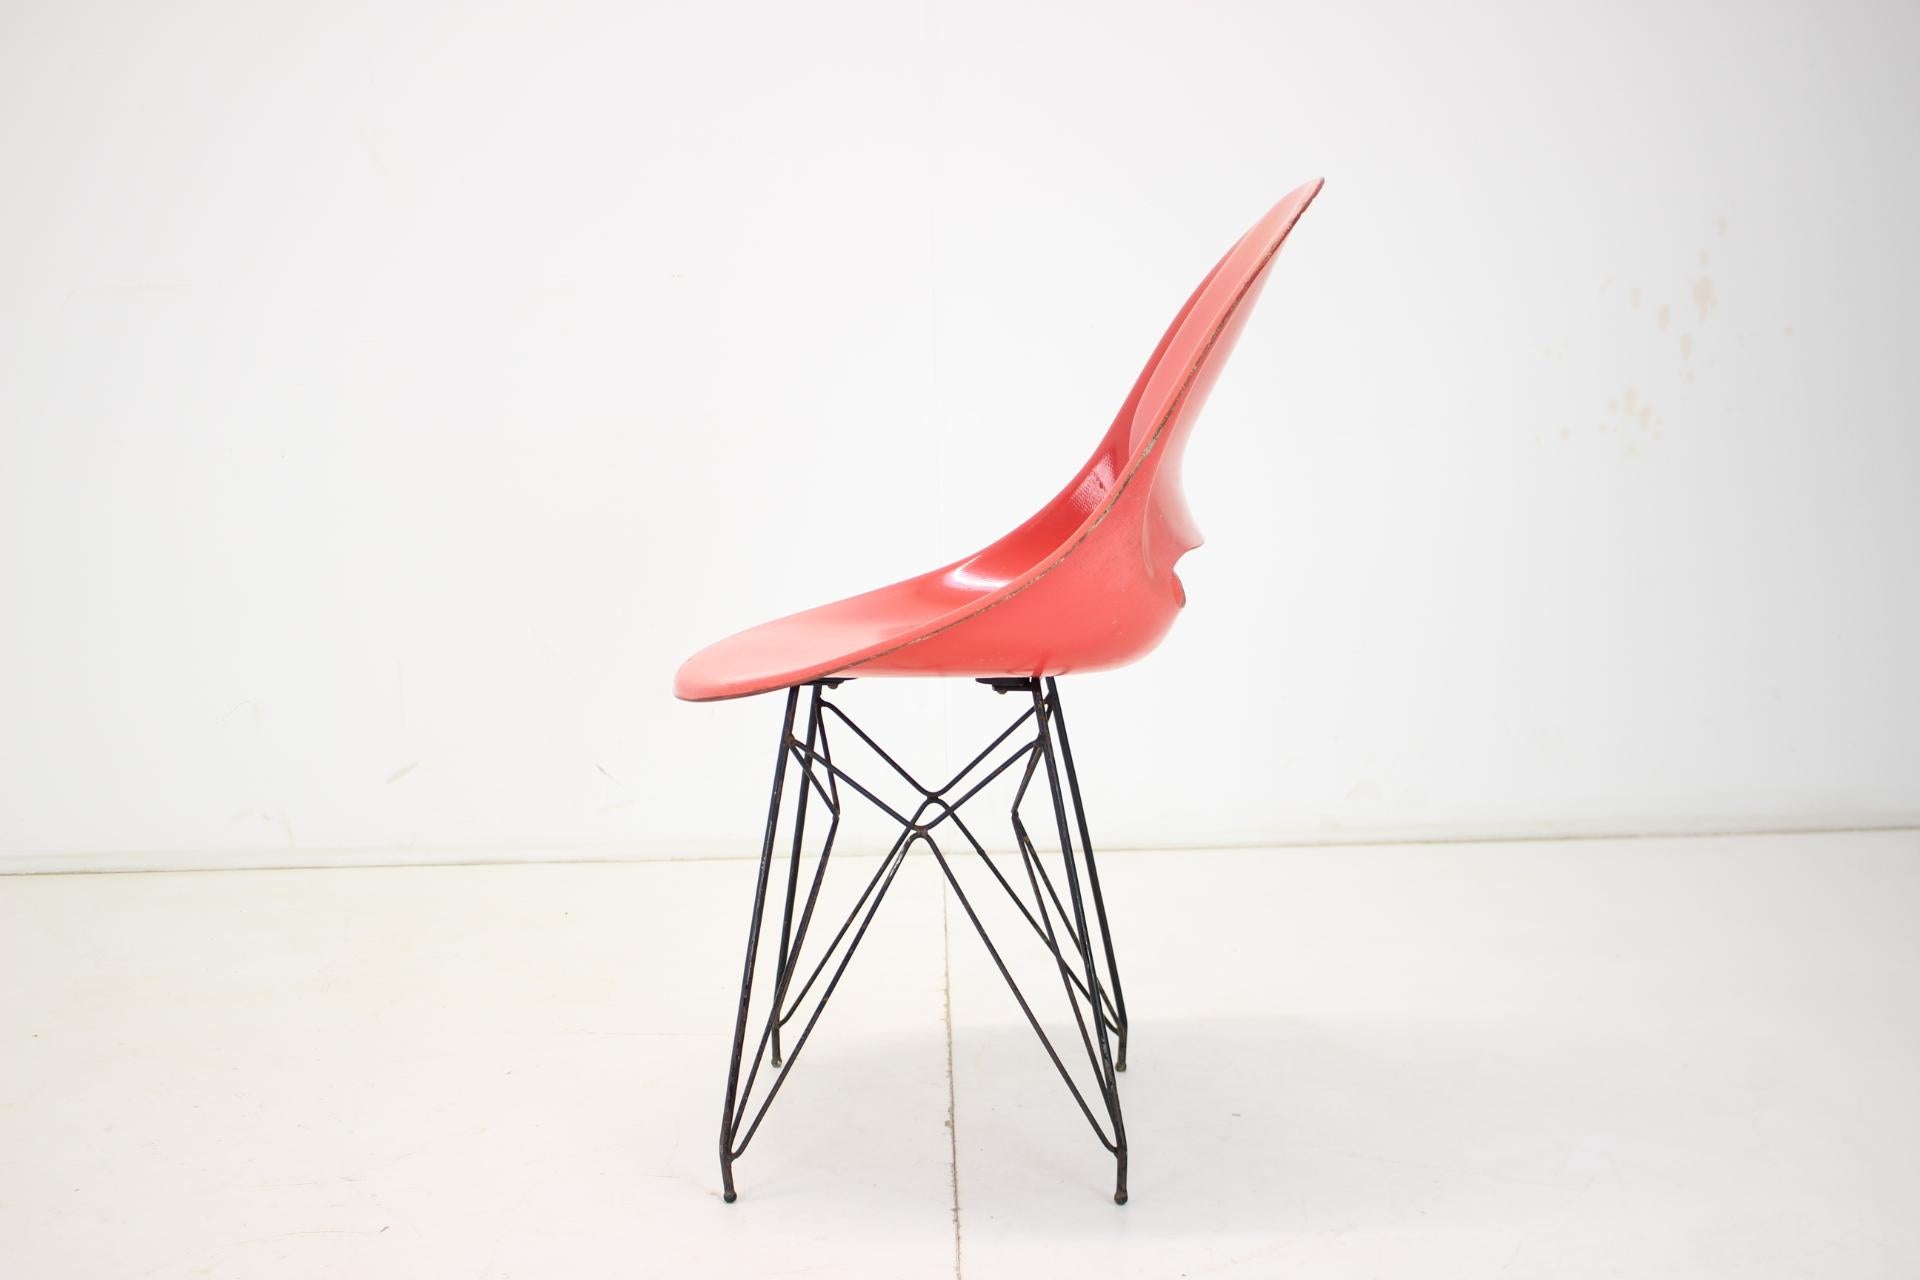 Midcentury Red Design Fiberglass Dining Chairs by M.Navratil, 1960s For Sale 1